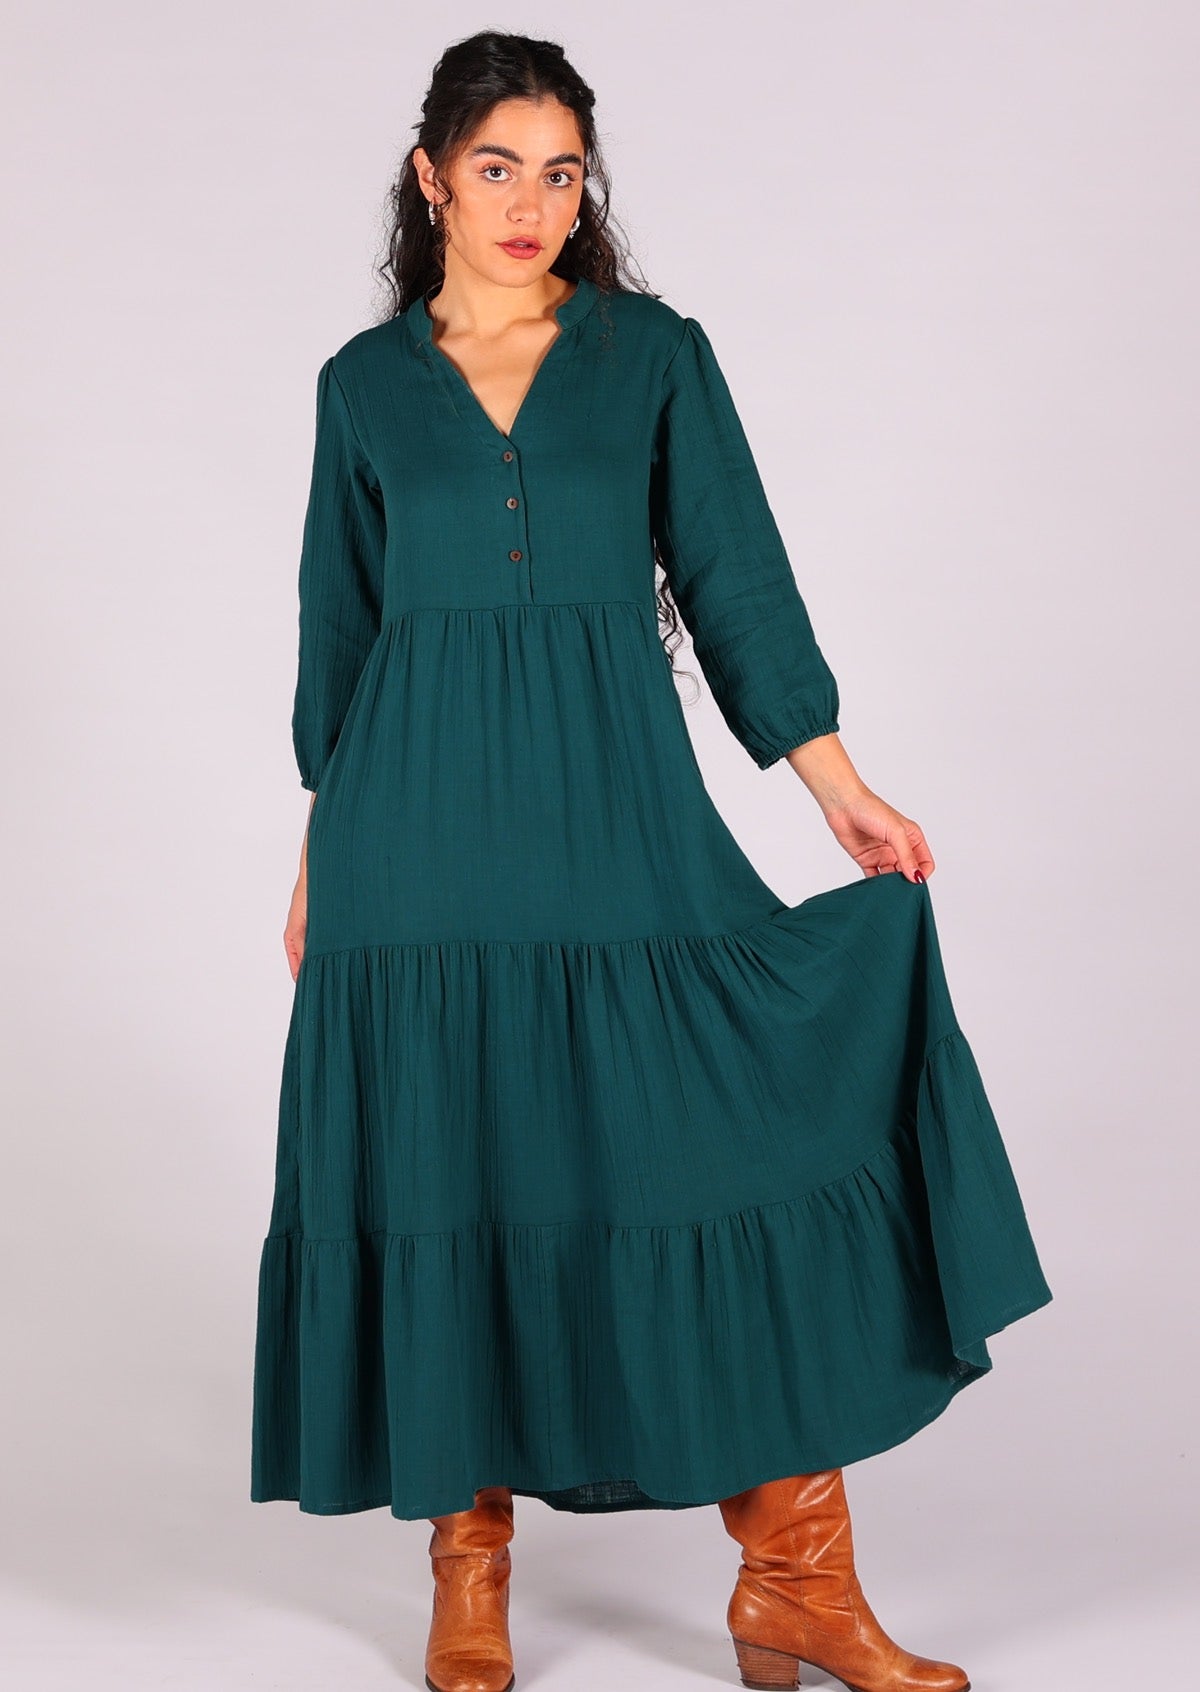 Double cotton maxi dress with tiers gives this dress volume